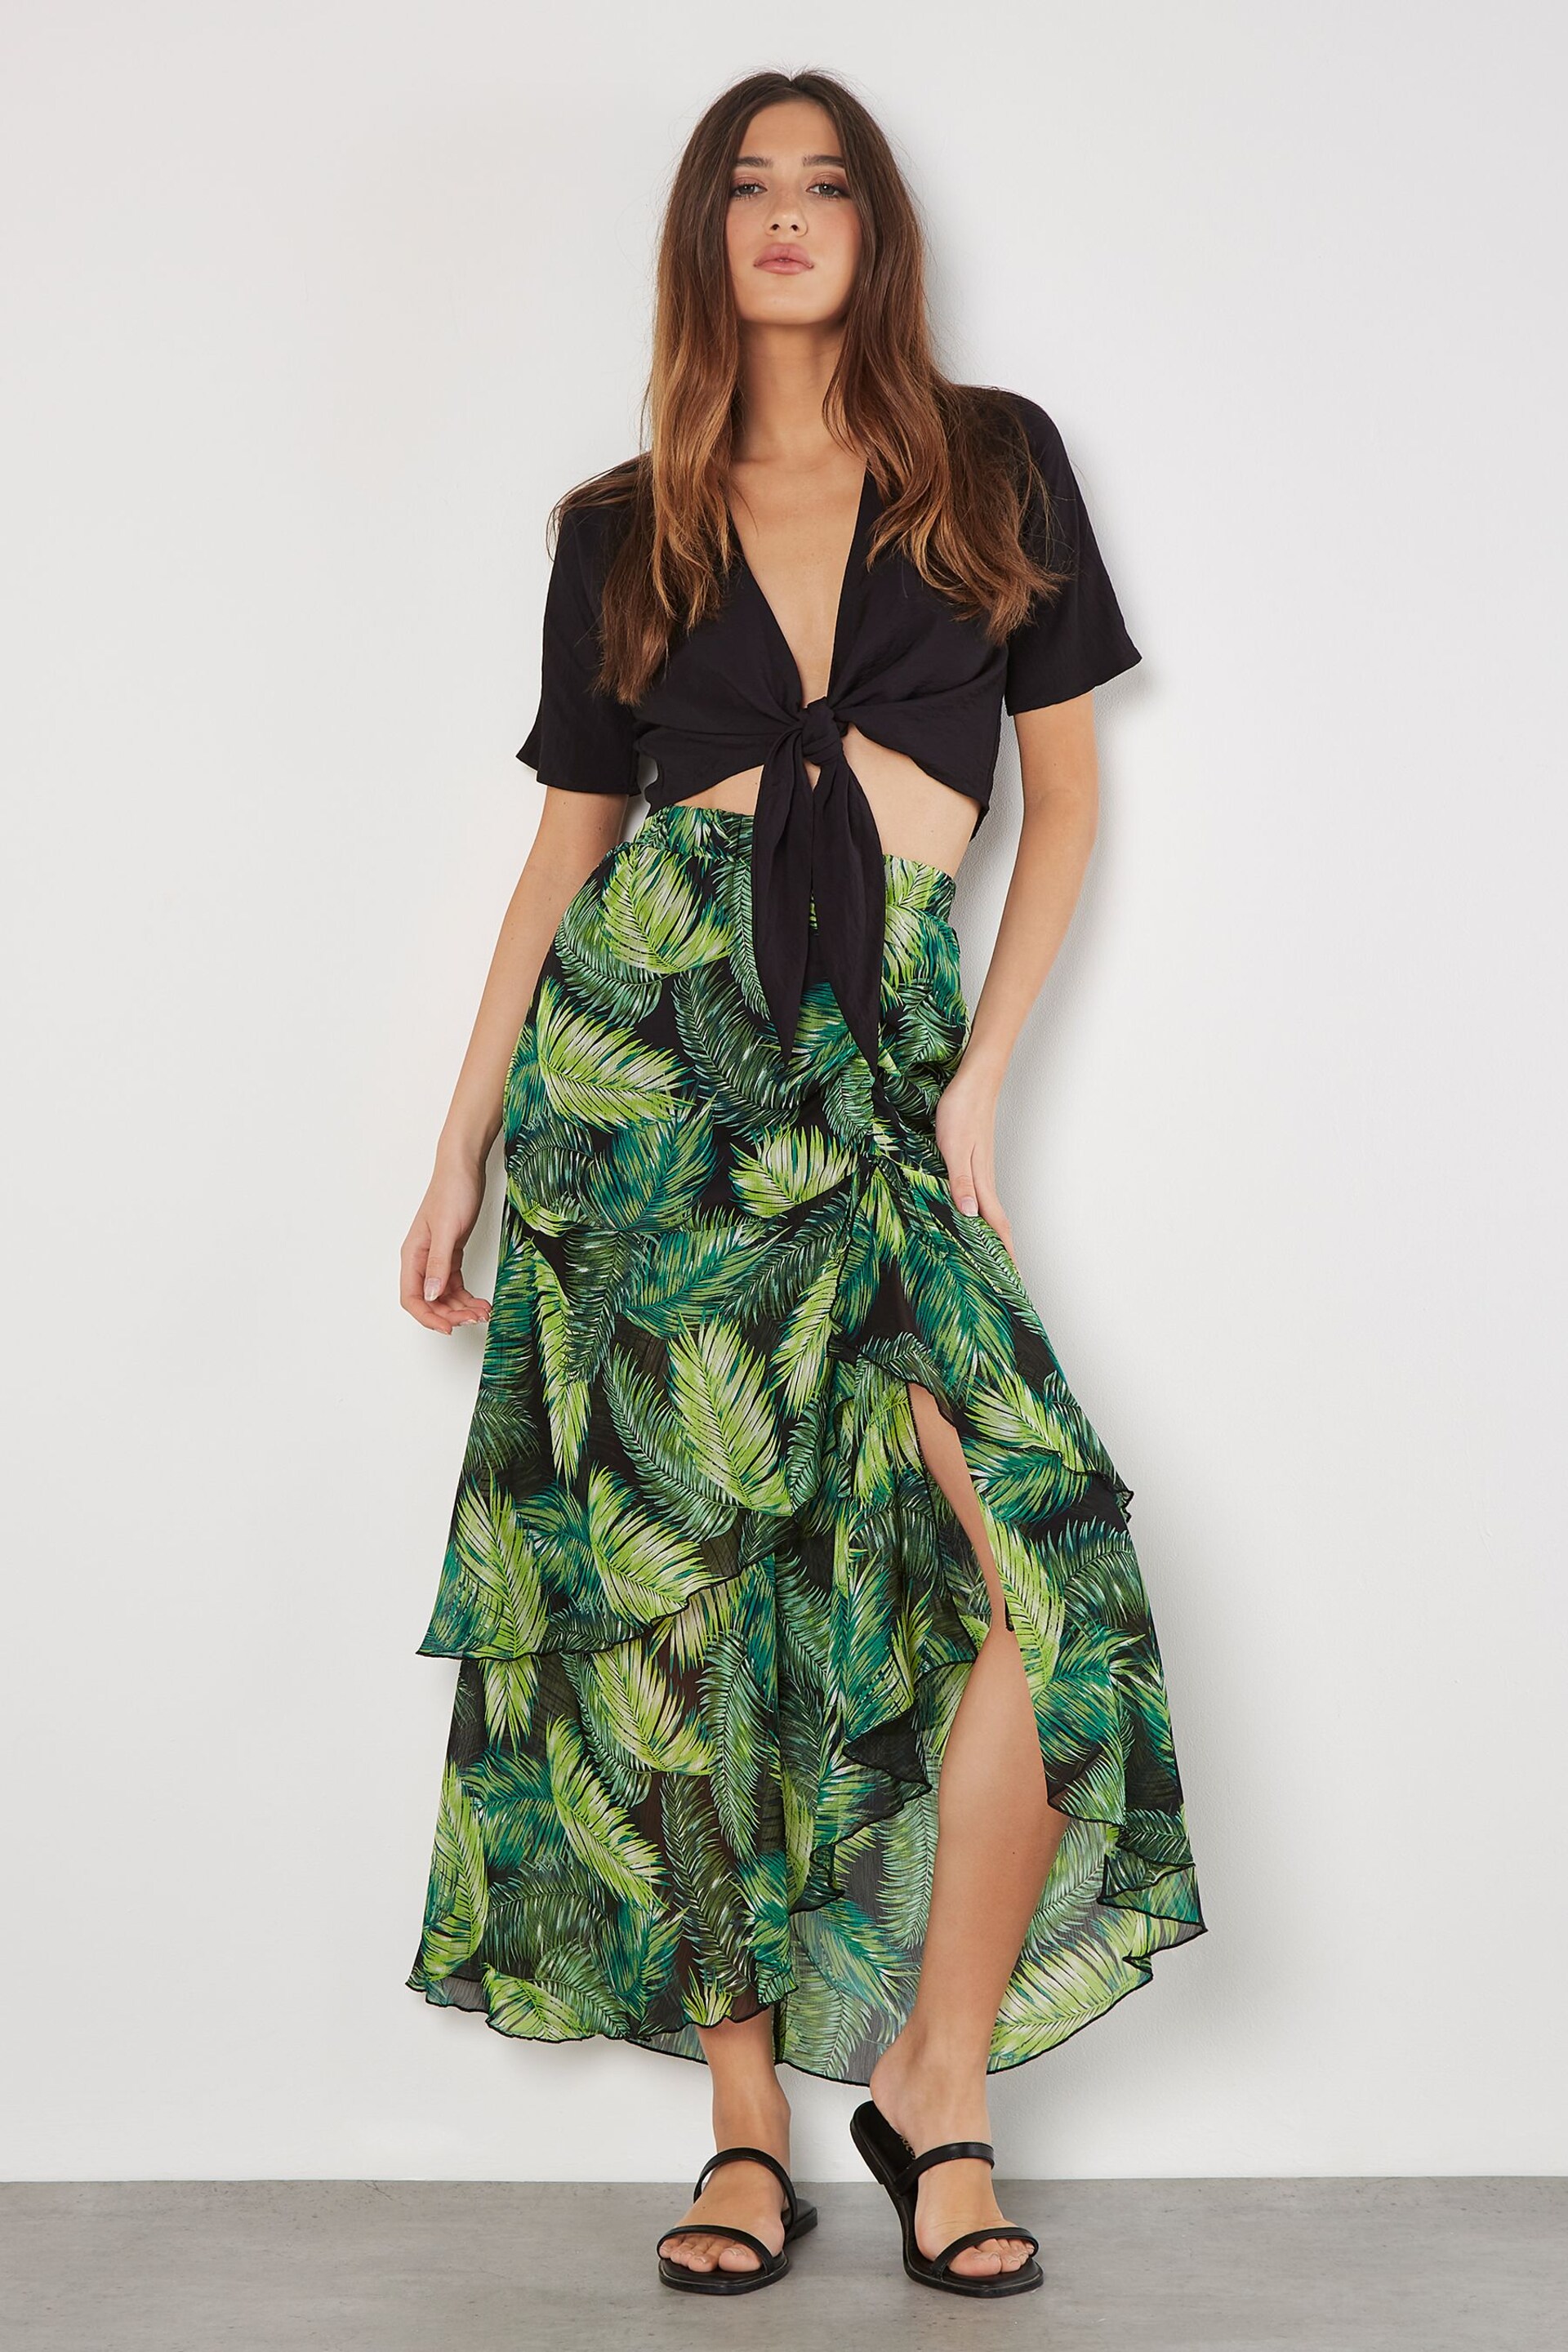 Apricot Green Crinkled Ruched Layered Skirt - Image 1 of 4